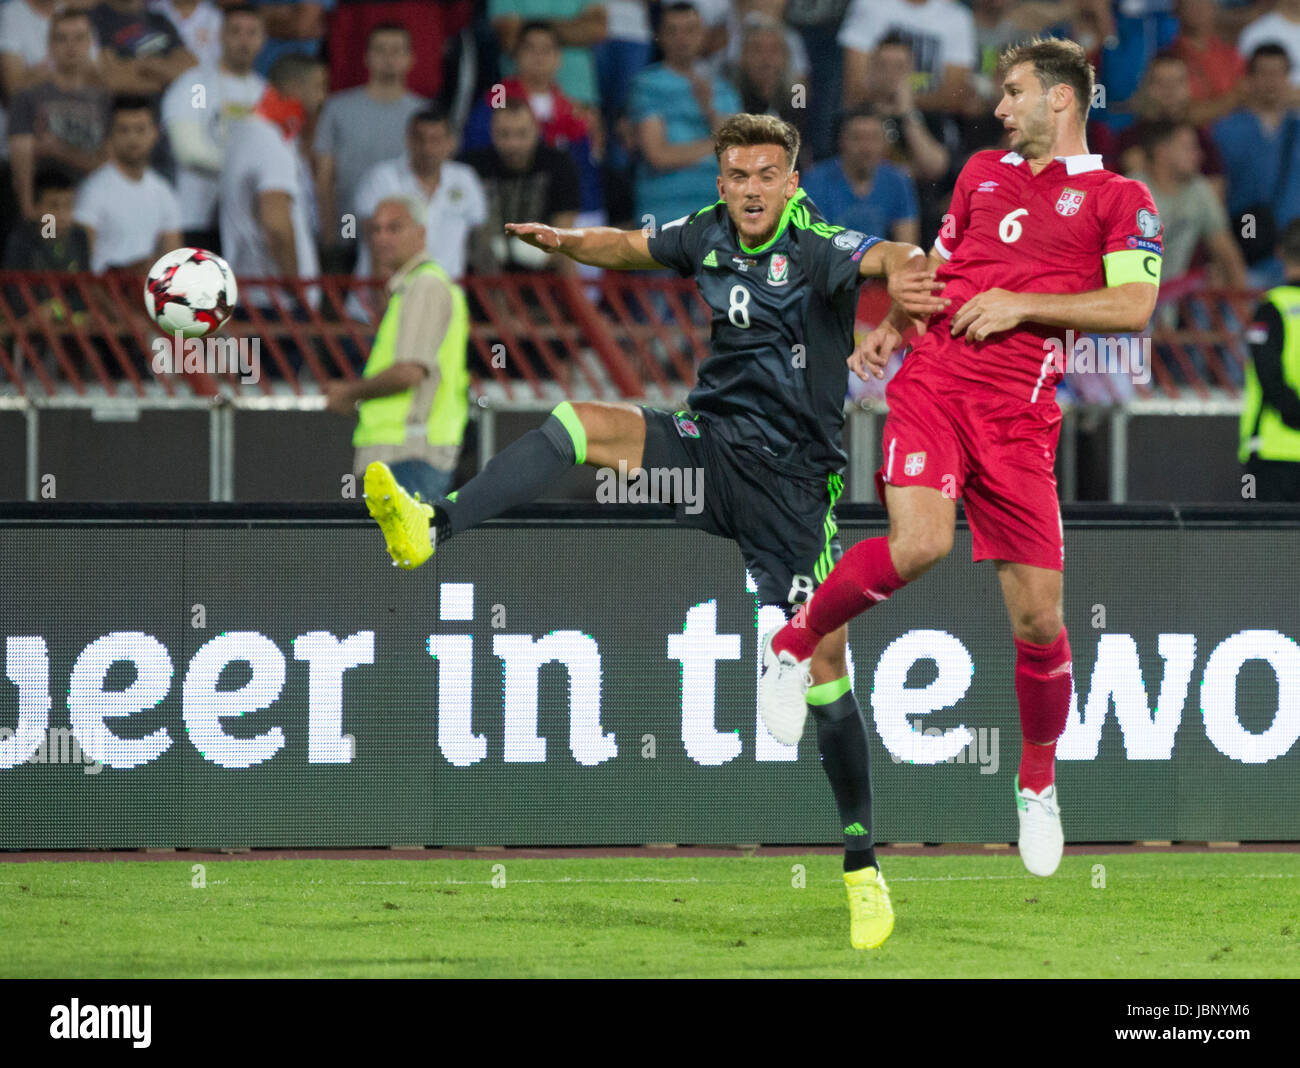 BELGRADE, SERBIA - JUNE 11, 2017: Branislav Ivanovic (R) of Serbia in action against Emyr Huws (L) of Wales during the 2018 FIFA World Cup Qualifier m Stock Photo